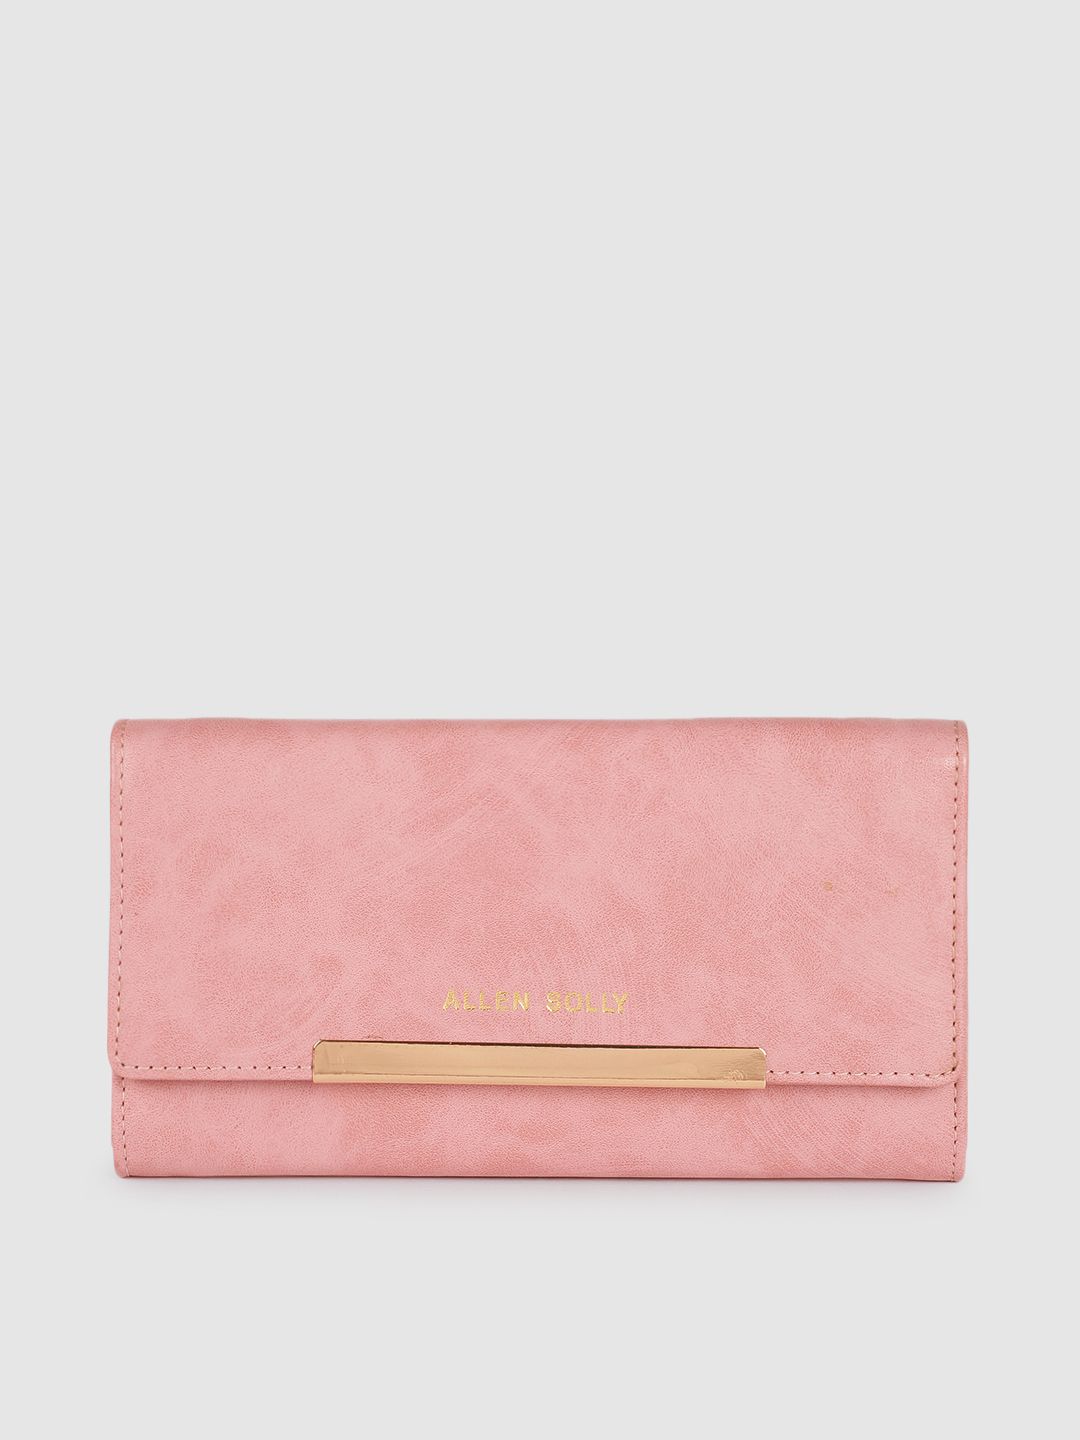 Allen Solly Women Pink PU Two Fold Wallet Price in India